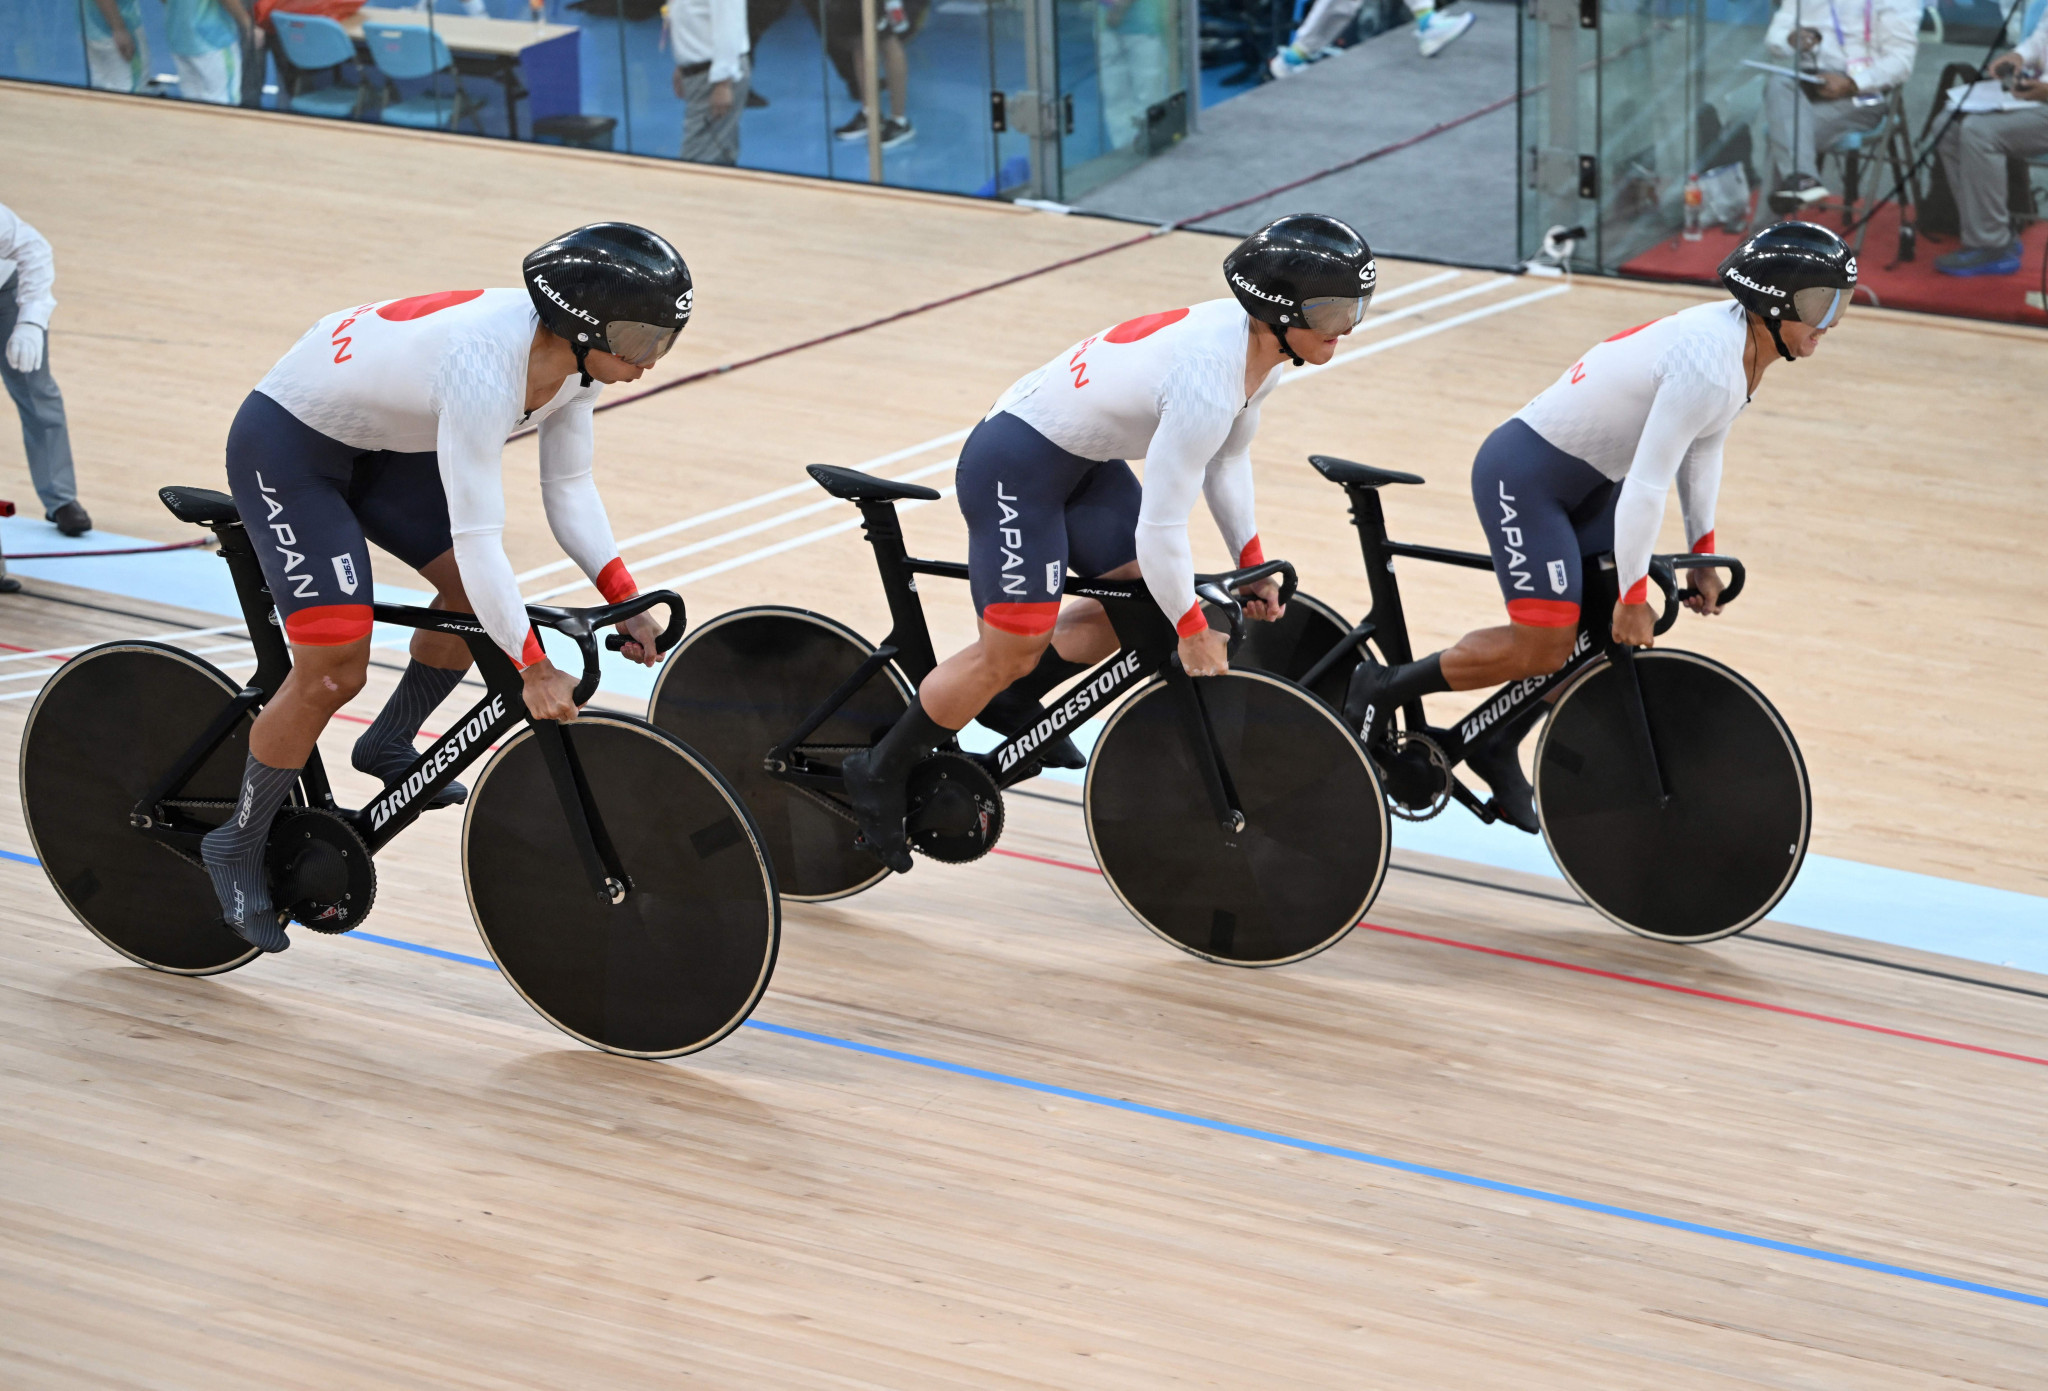 Japan's men's track cycling sprint team prevented China from claiming a golden double after they won the women's event ©Getty Images